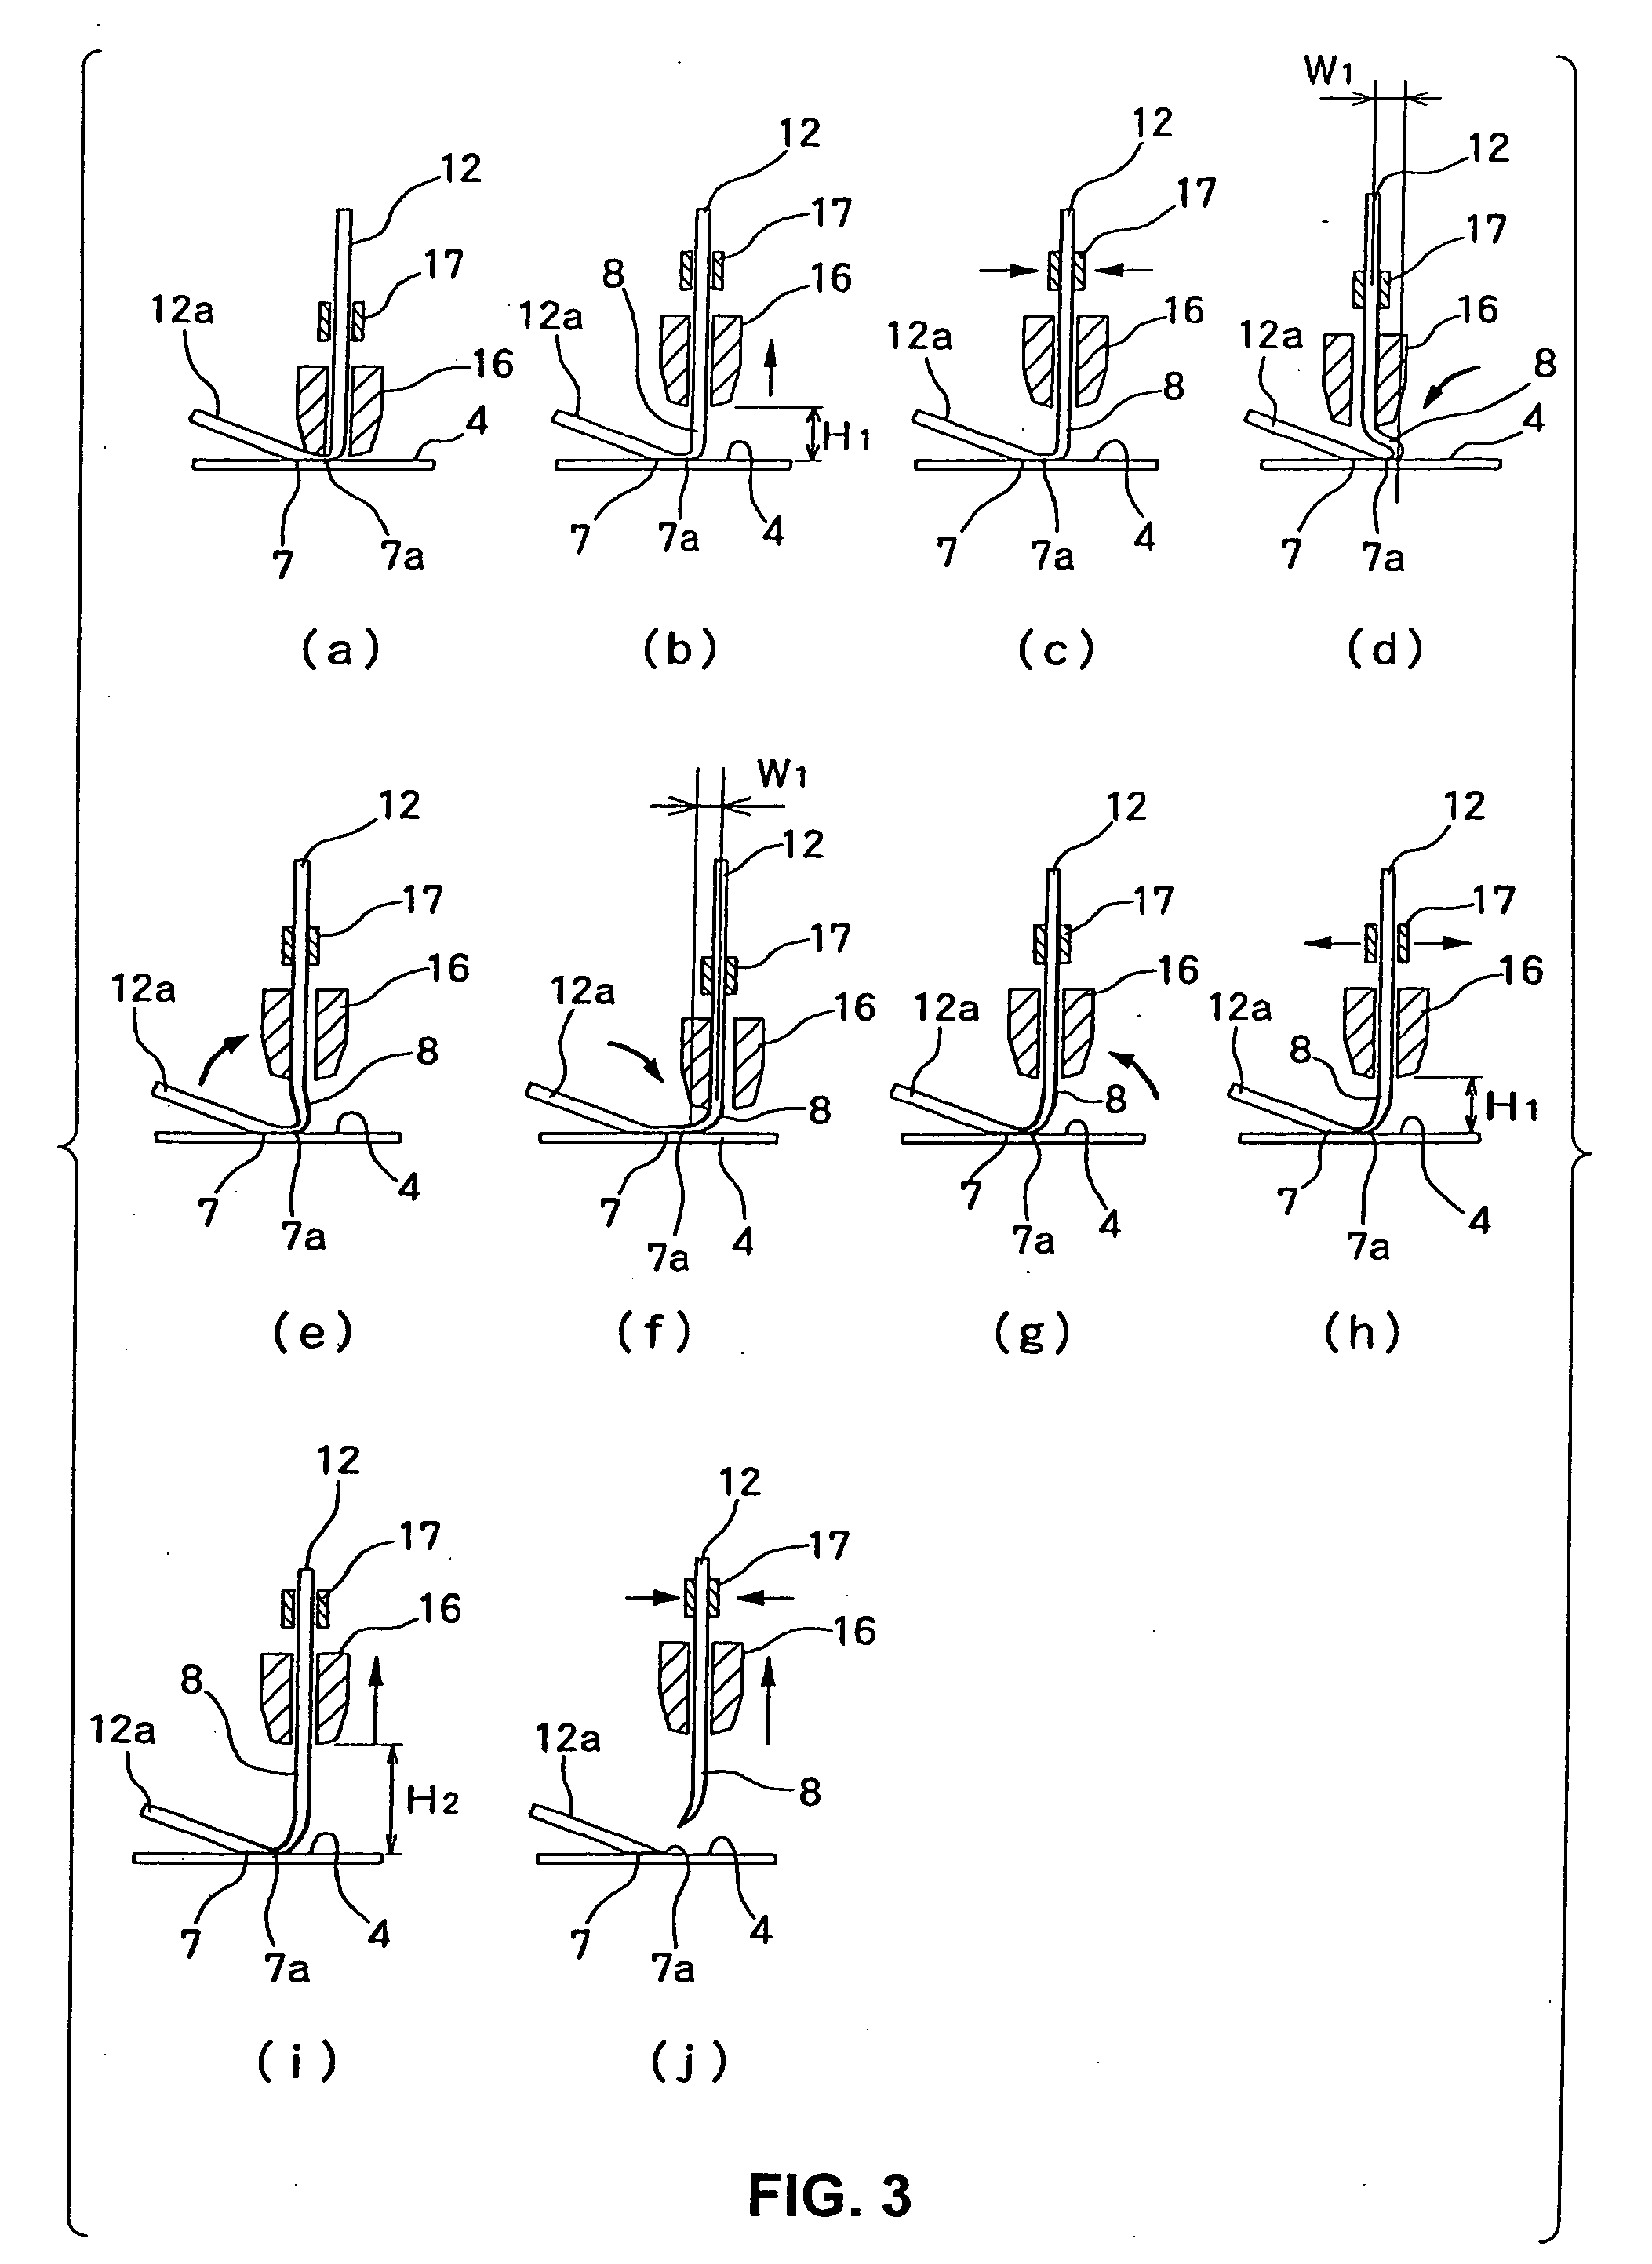 Tail wire cutting method and bonding apparatus